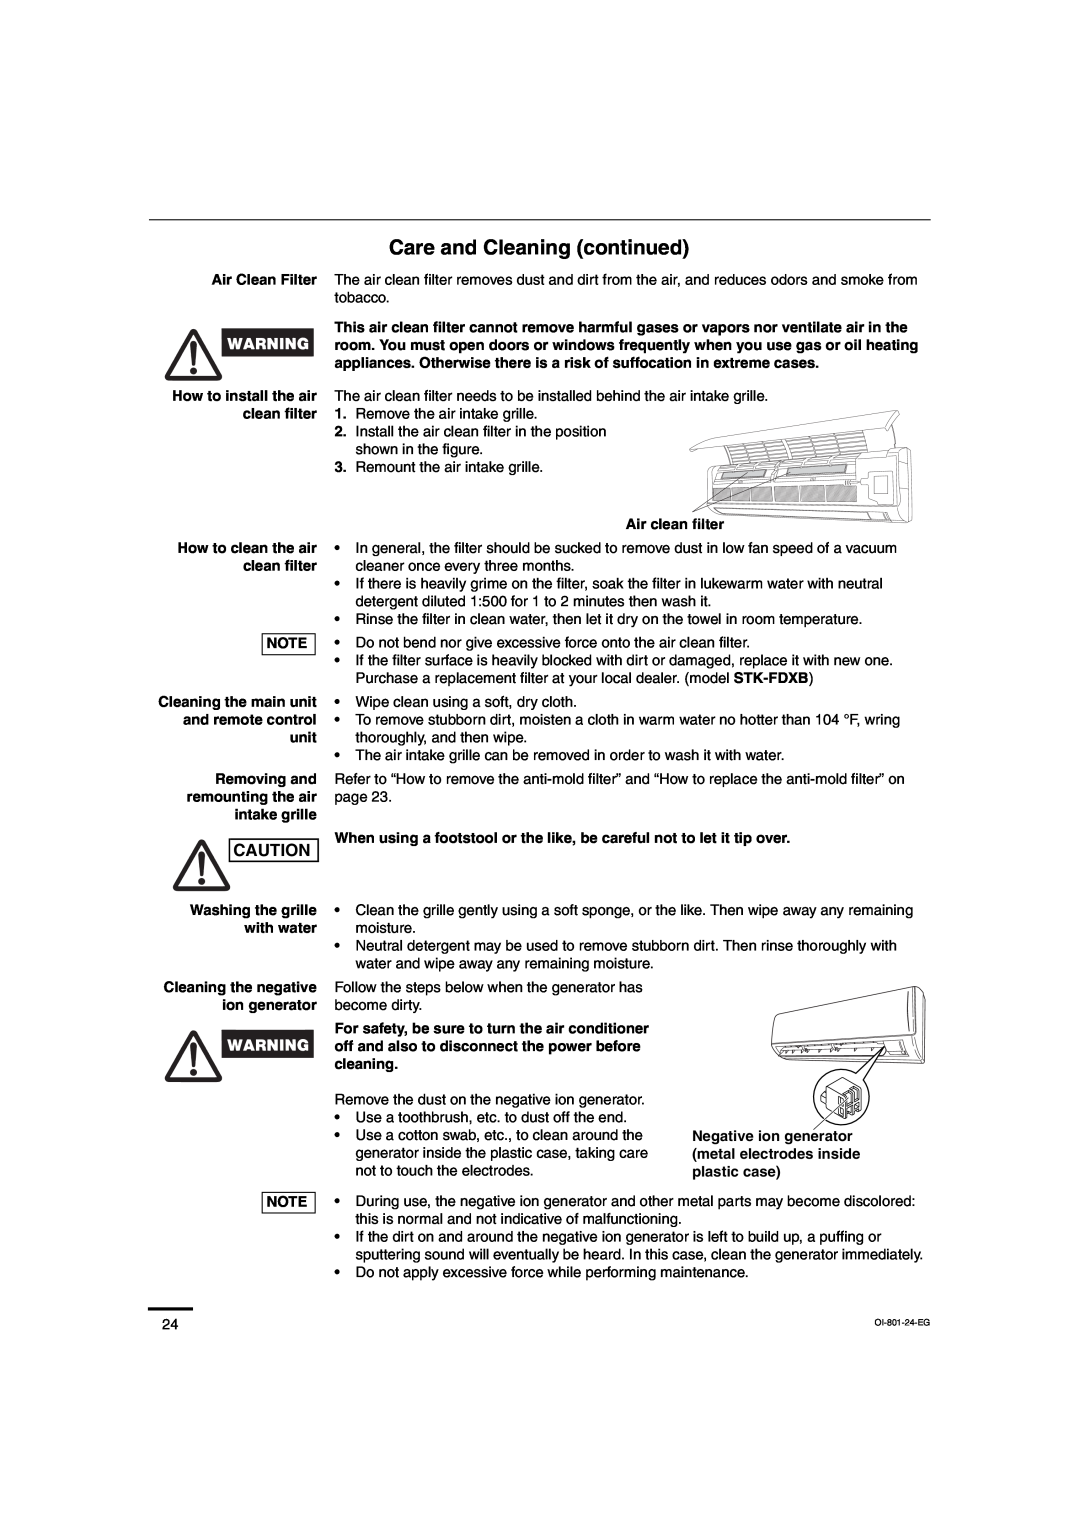 Sanyo CH2472, CH1872 service manual Care and Cleaning continued, Air Clean Filter 